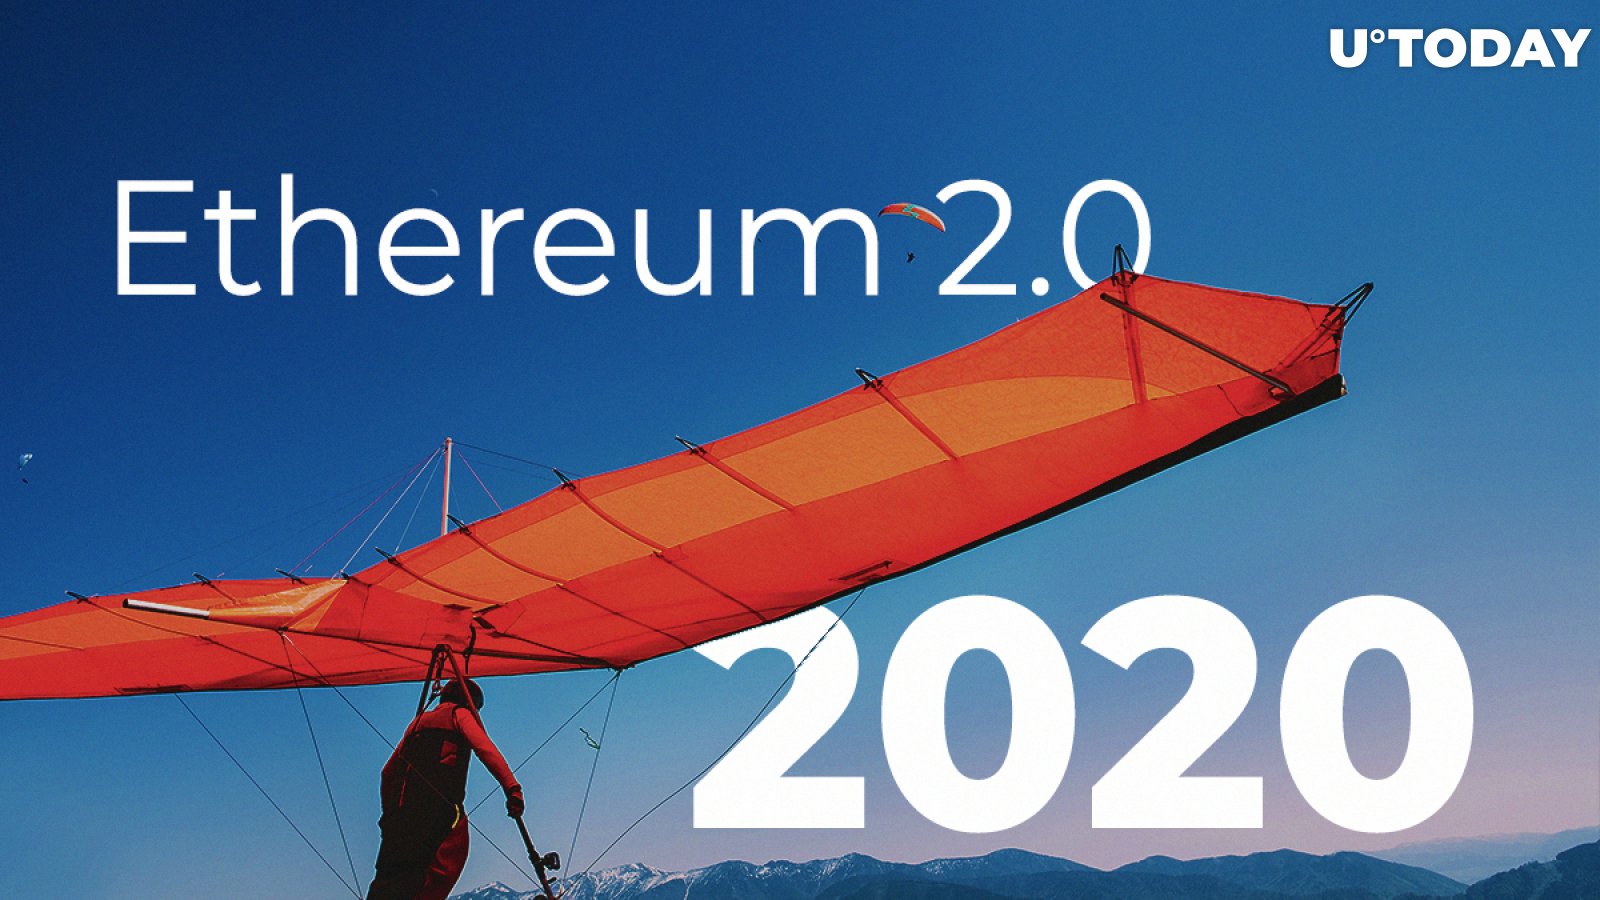 Ethereum (ETH) 2.0 to Launch in 2020 in Co-Existence with Ethereum 1.0: Developer